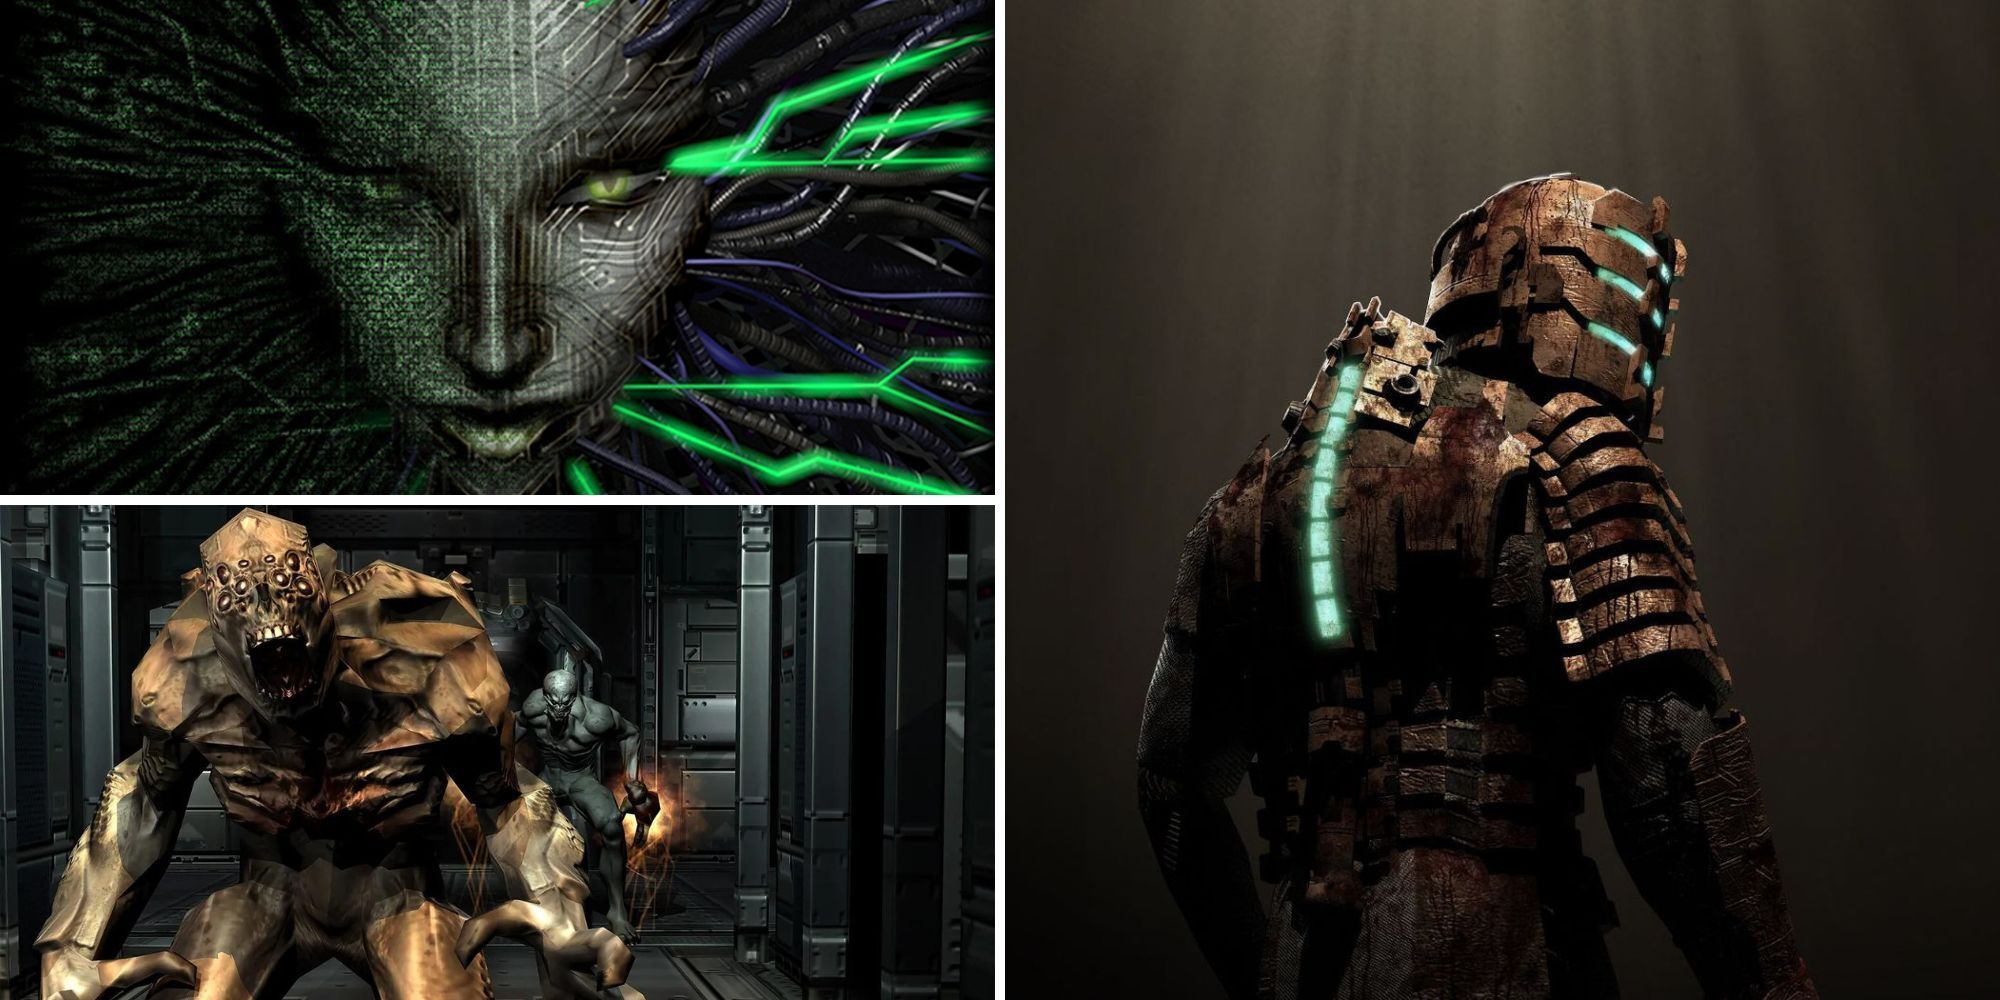 Collage of the Best Sci-Fi Horror Games (Dead Space, System Shock 2, Doom 3)